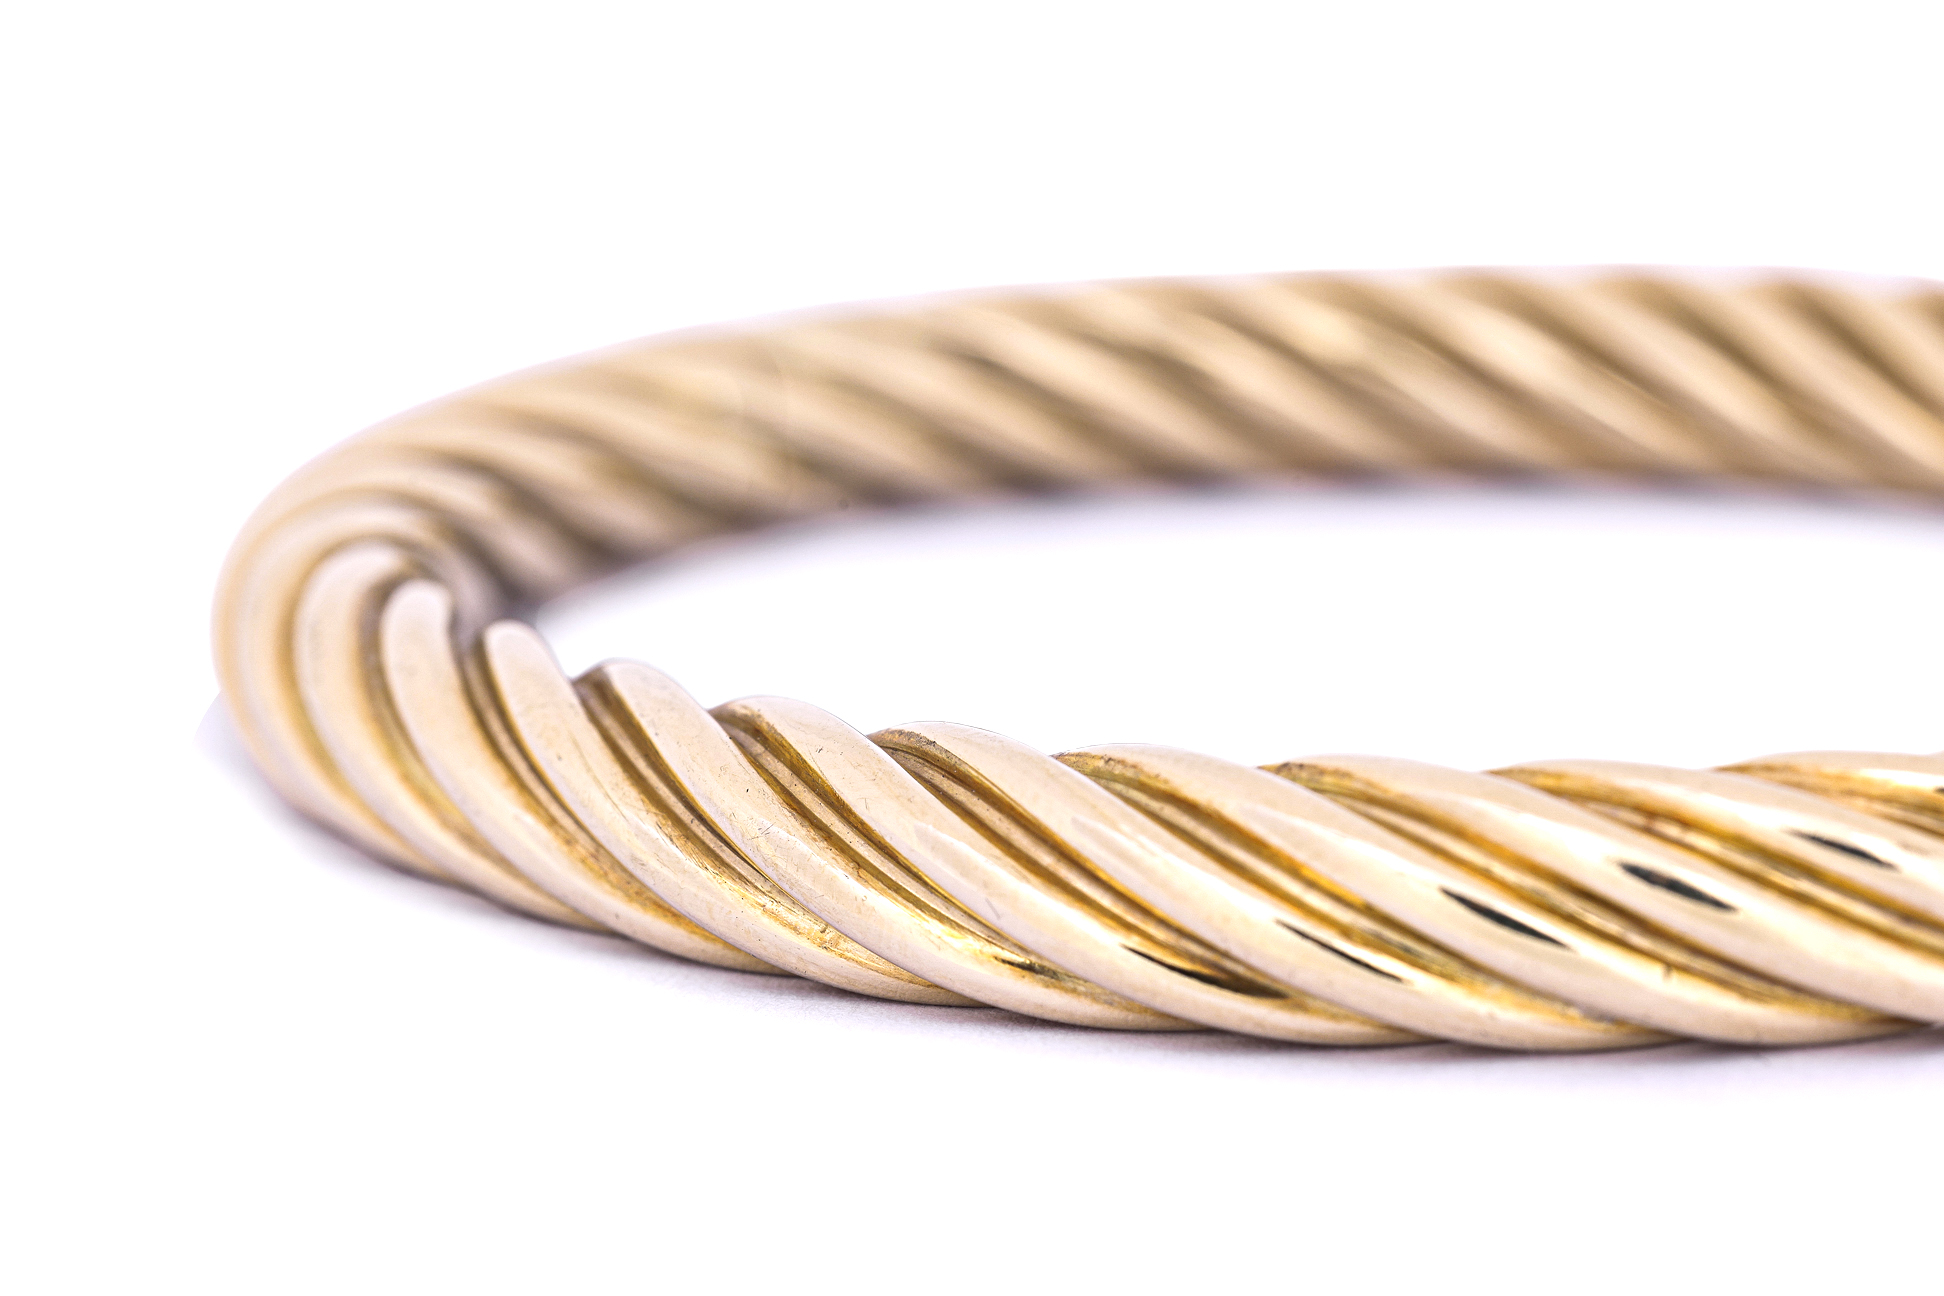 A GOLD BANGLE BY TIFFANY & CO. - Image 3 of 7